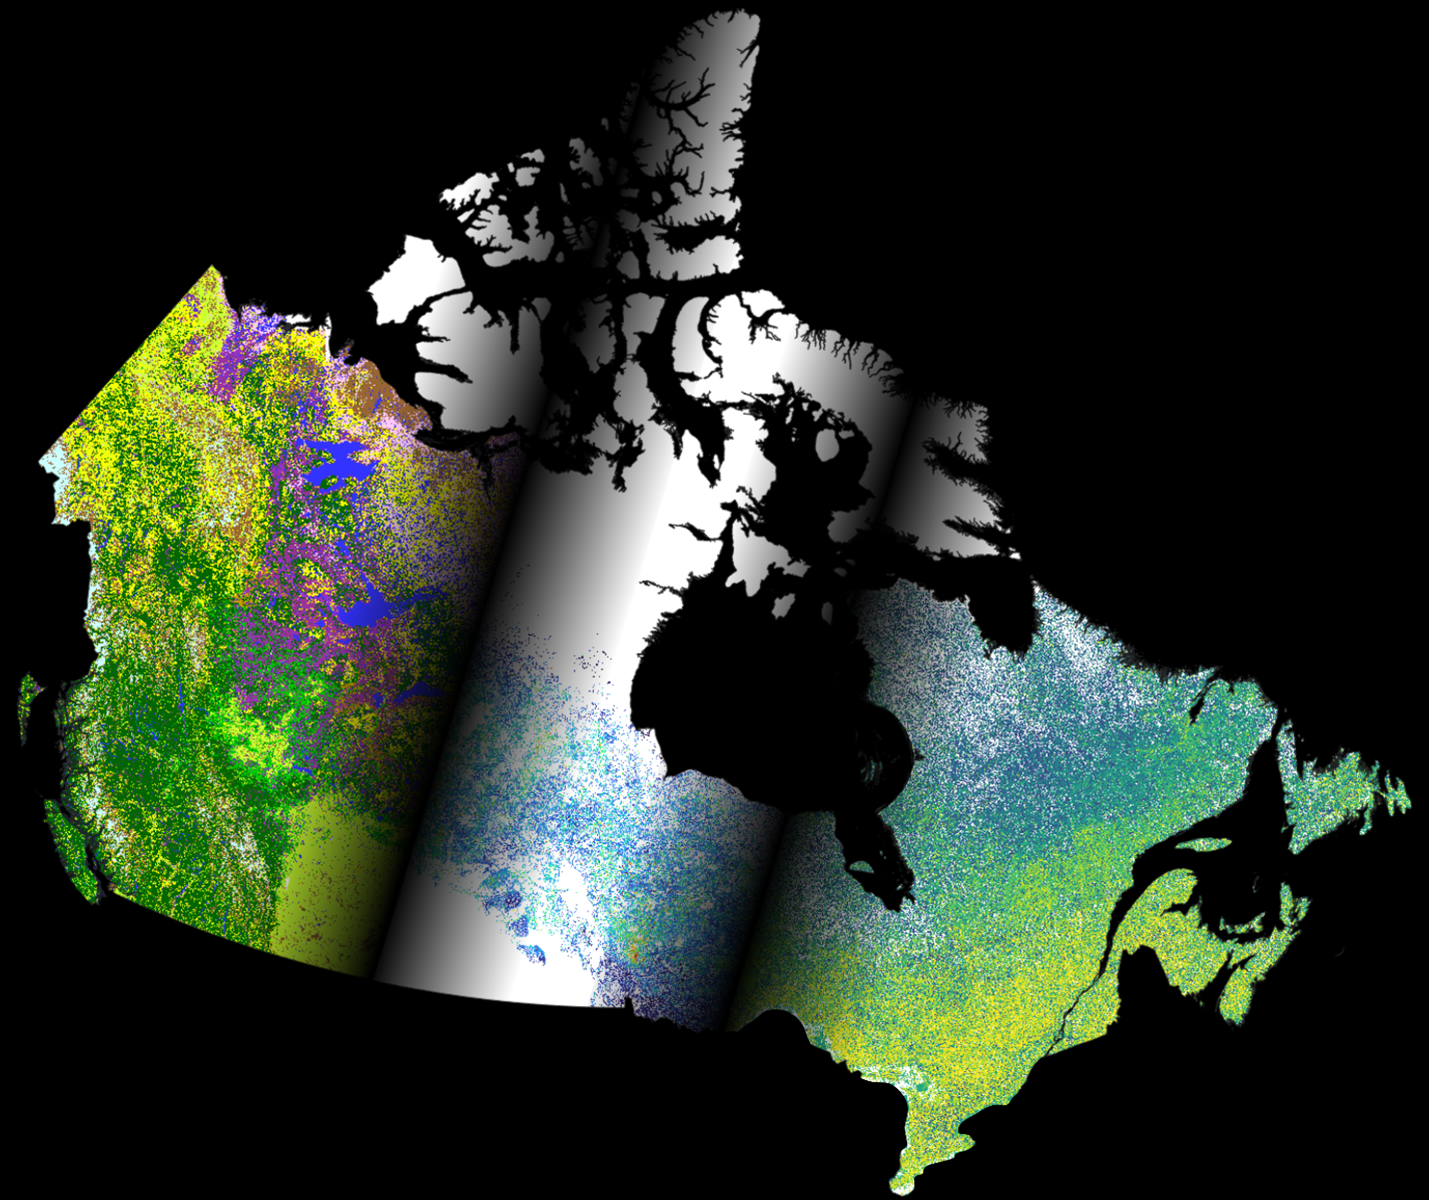 A rendered image of Canada colored by land cover type